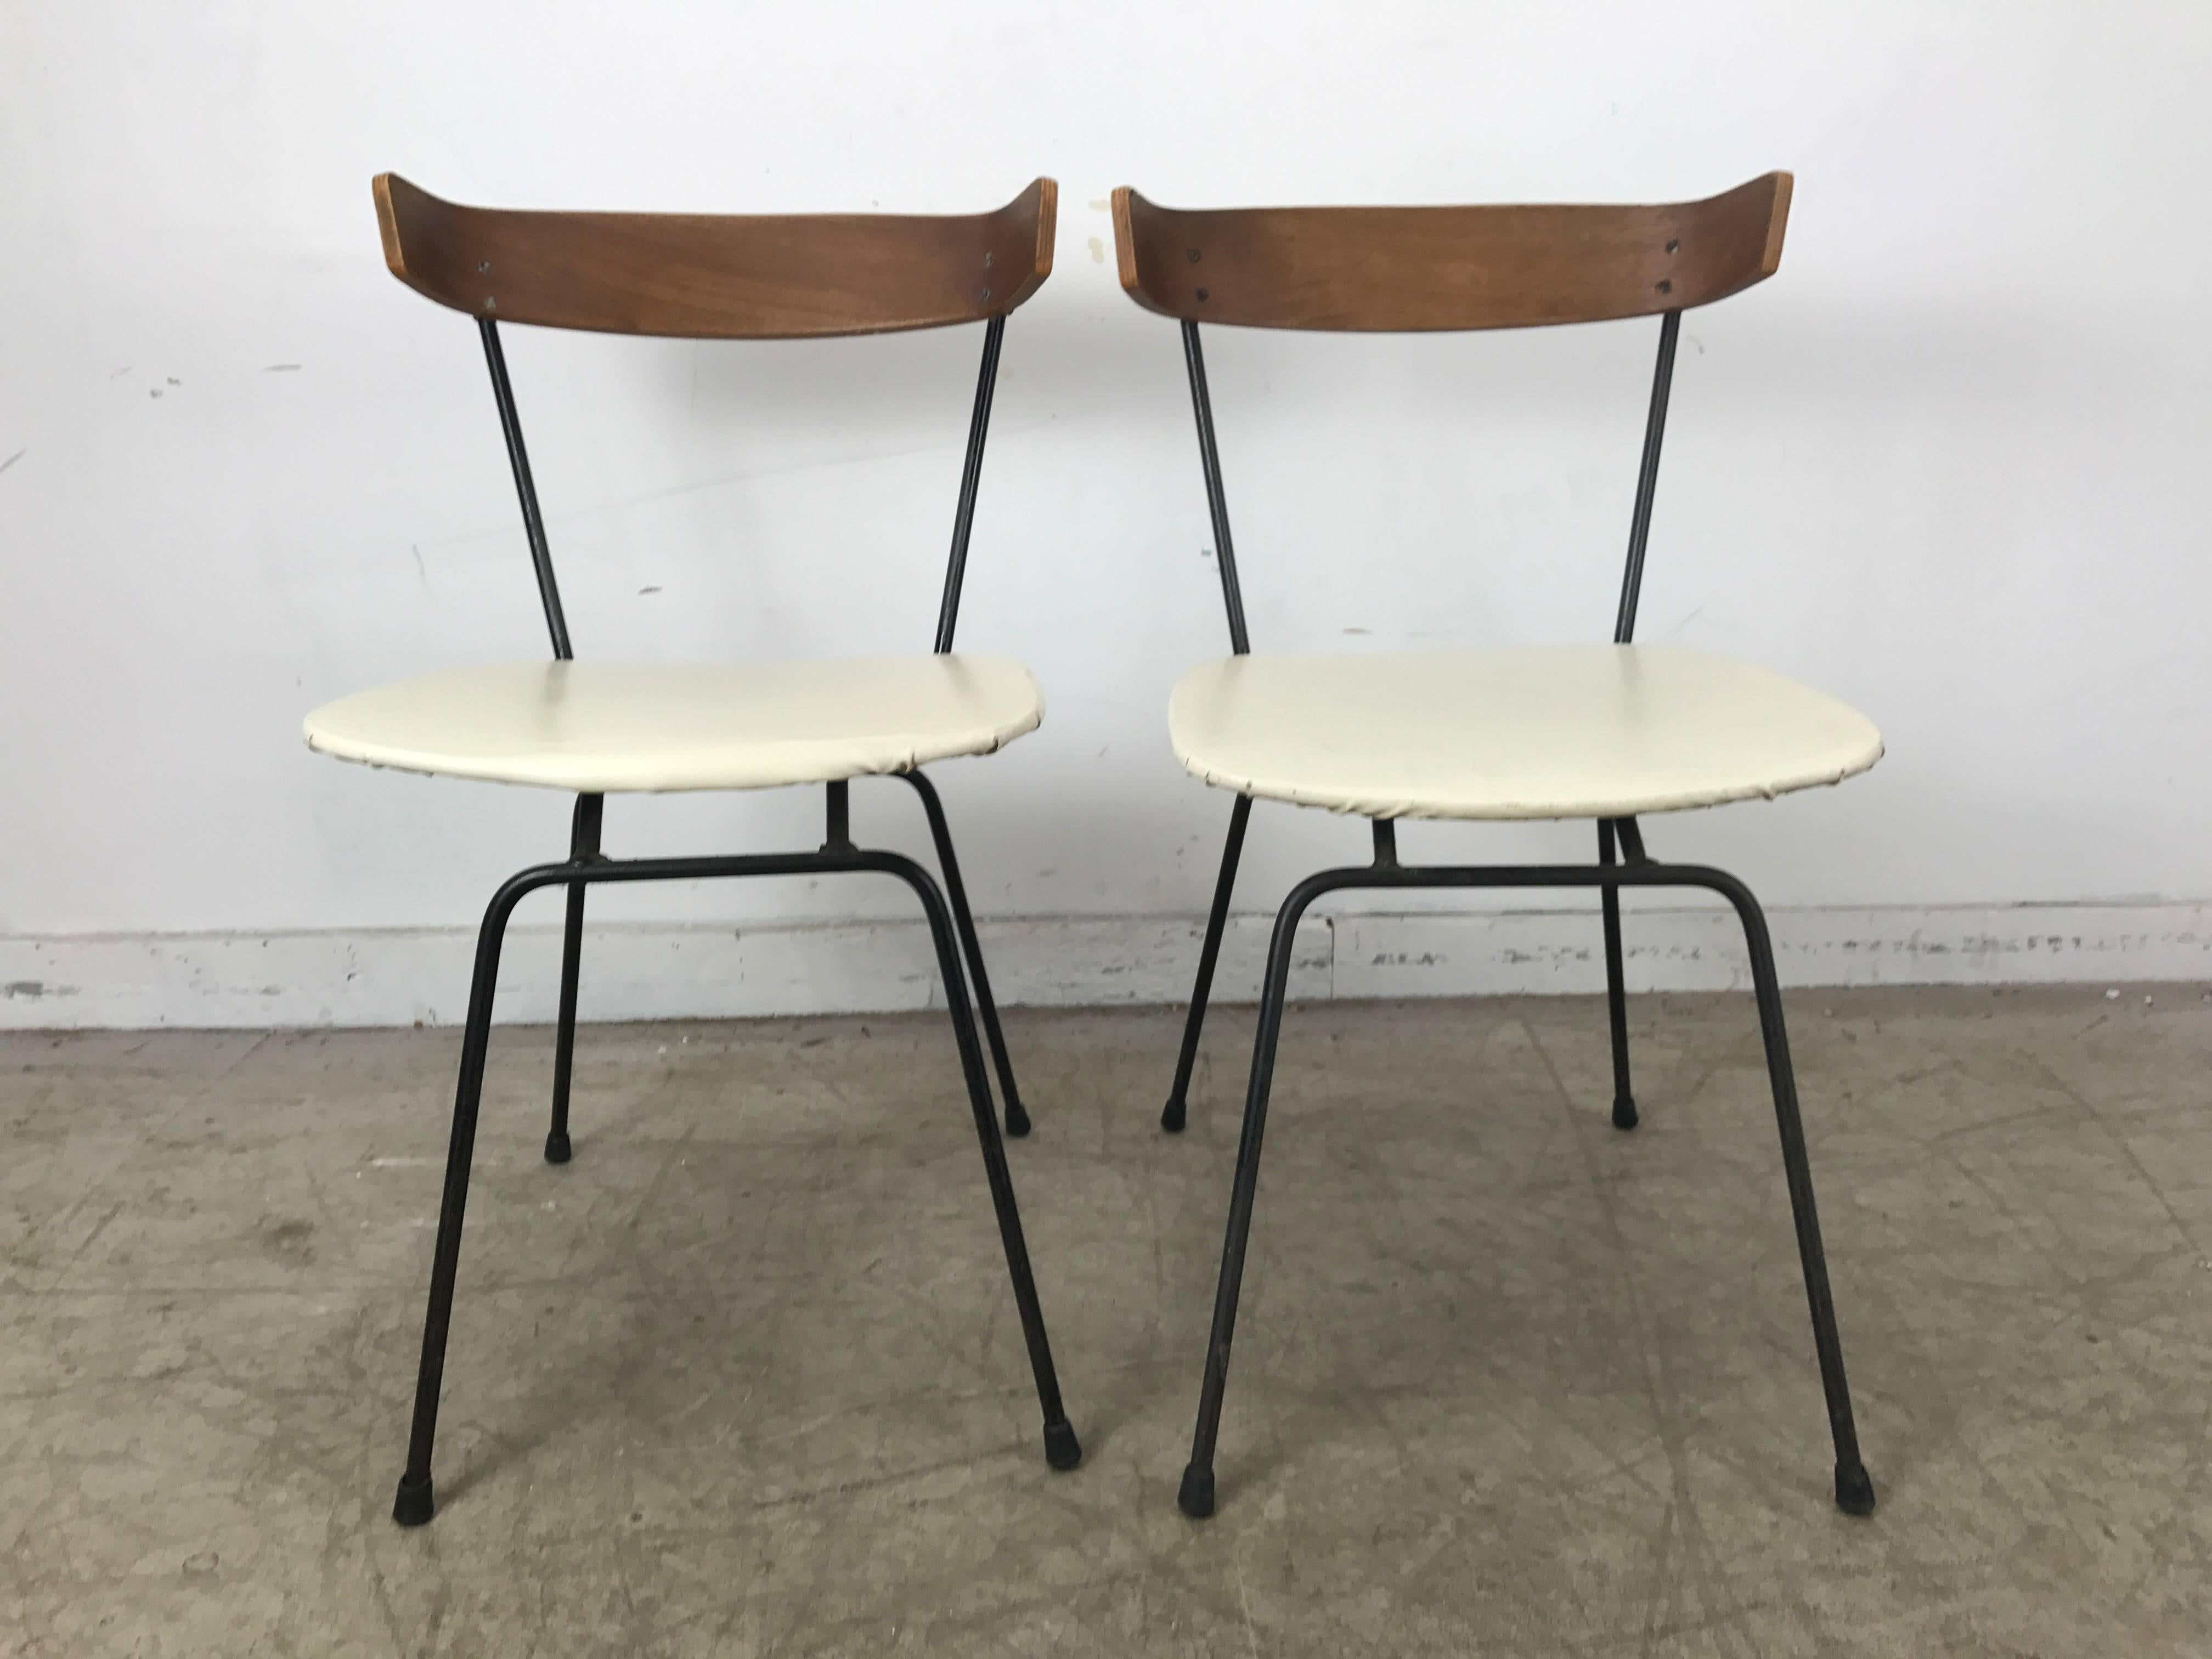 20th Century Classic Modernist Dining Chairs. Iron and Plywood by Clifford Pascoe